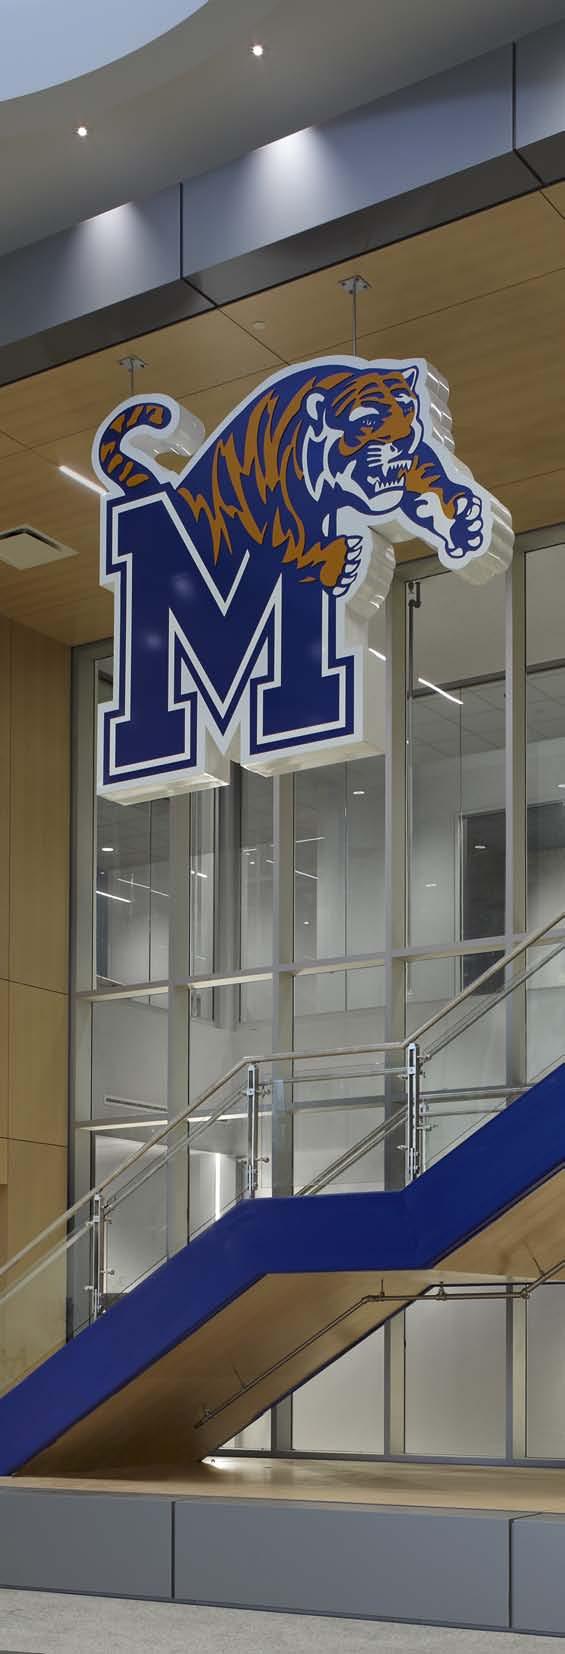 Project Highlights Celebrating nearly a century of University of Memphis basketball, the new Laurie-Walton Family Basketball Center showcases this rich history and positions University of Memphis